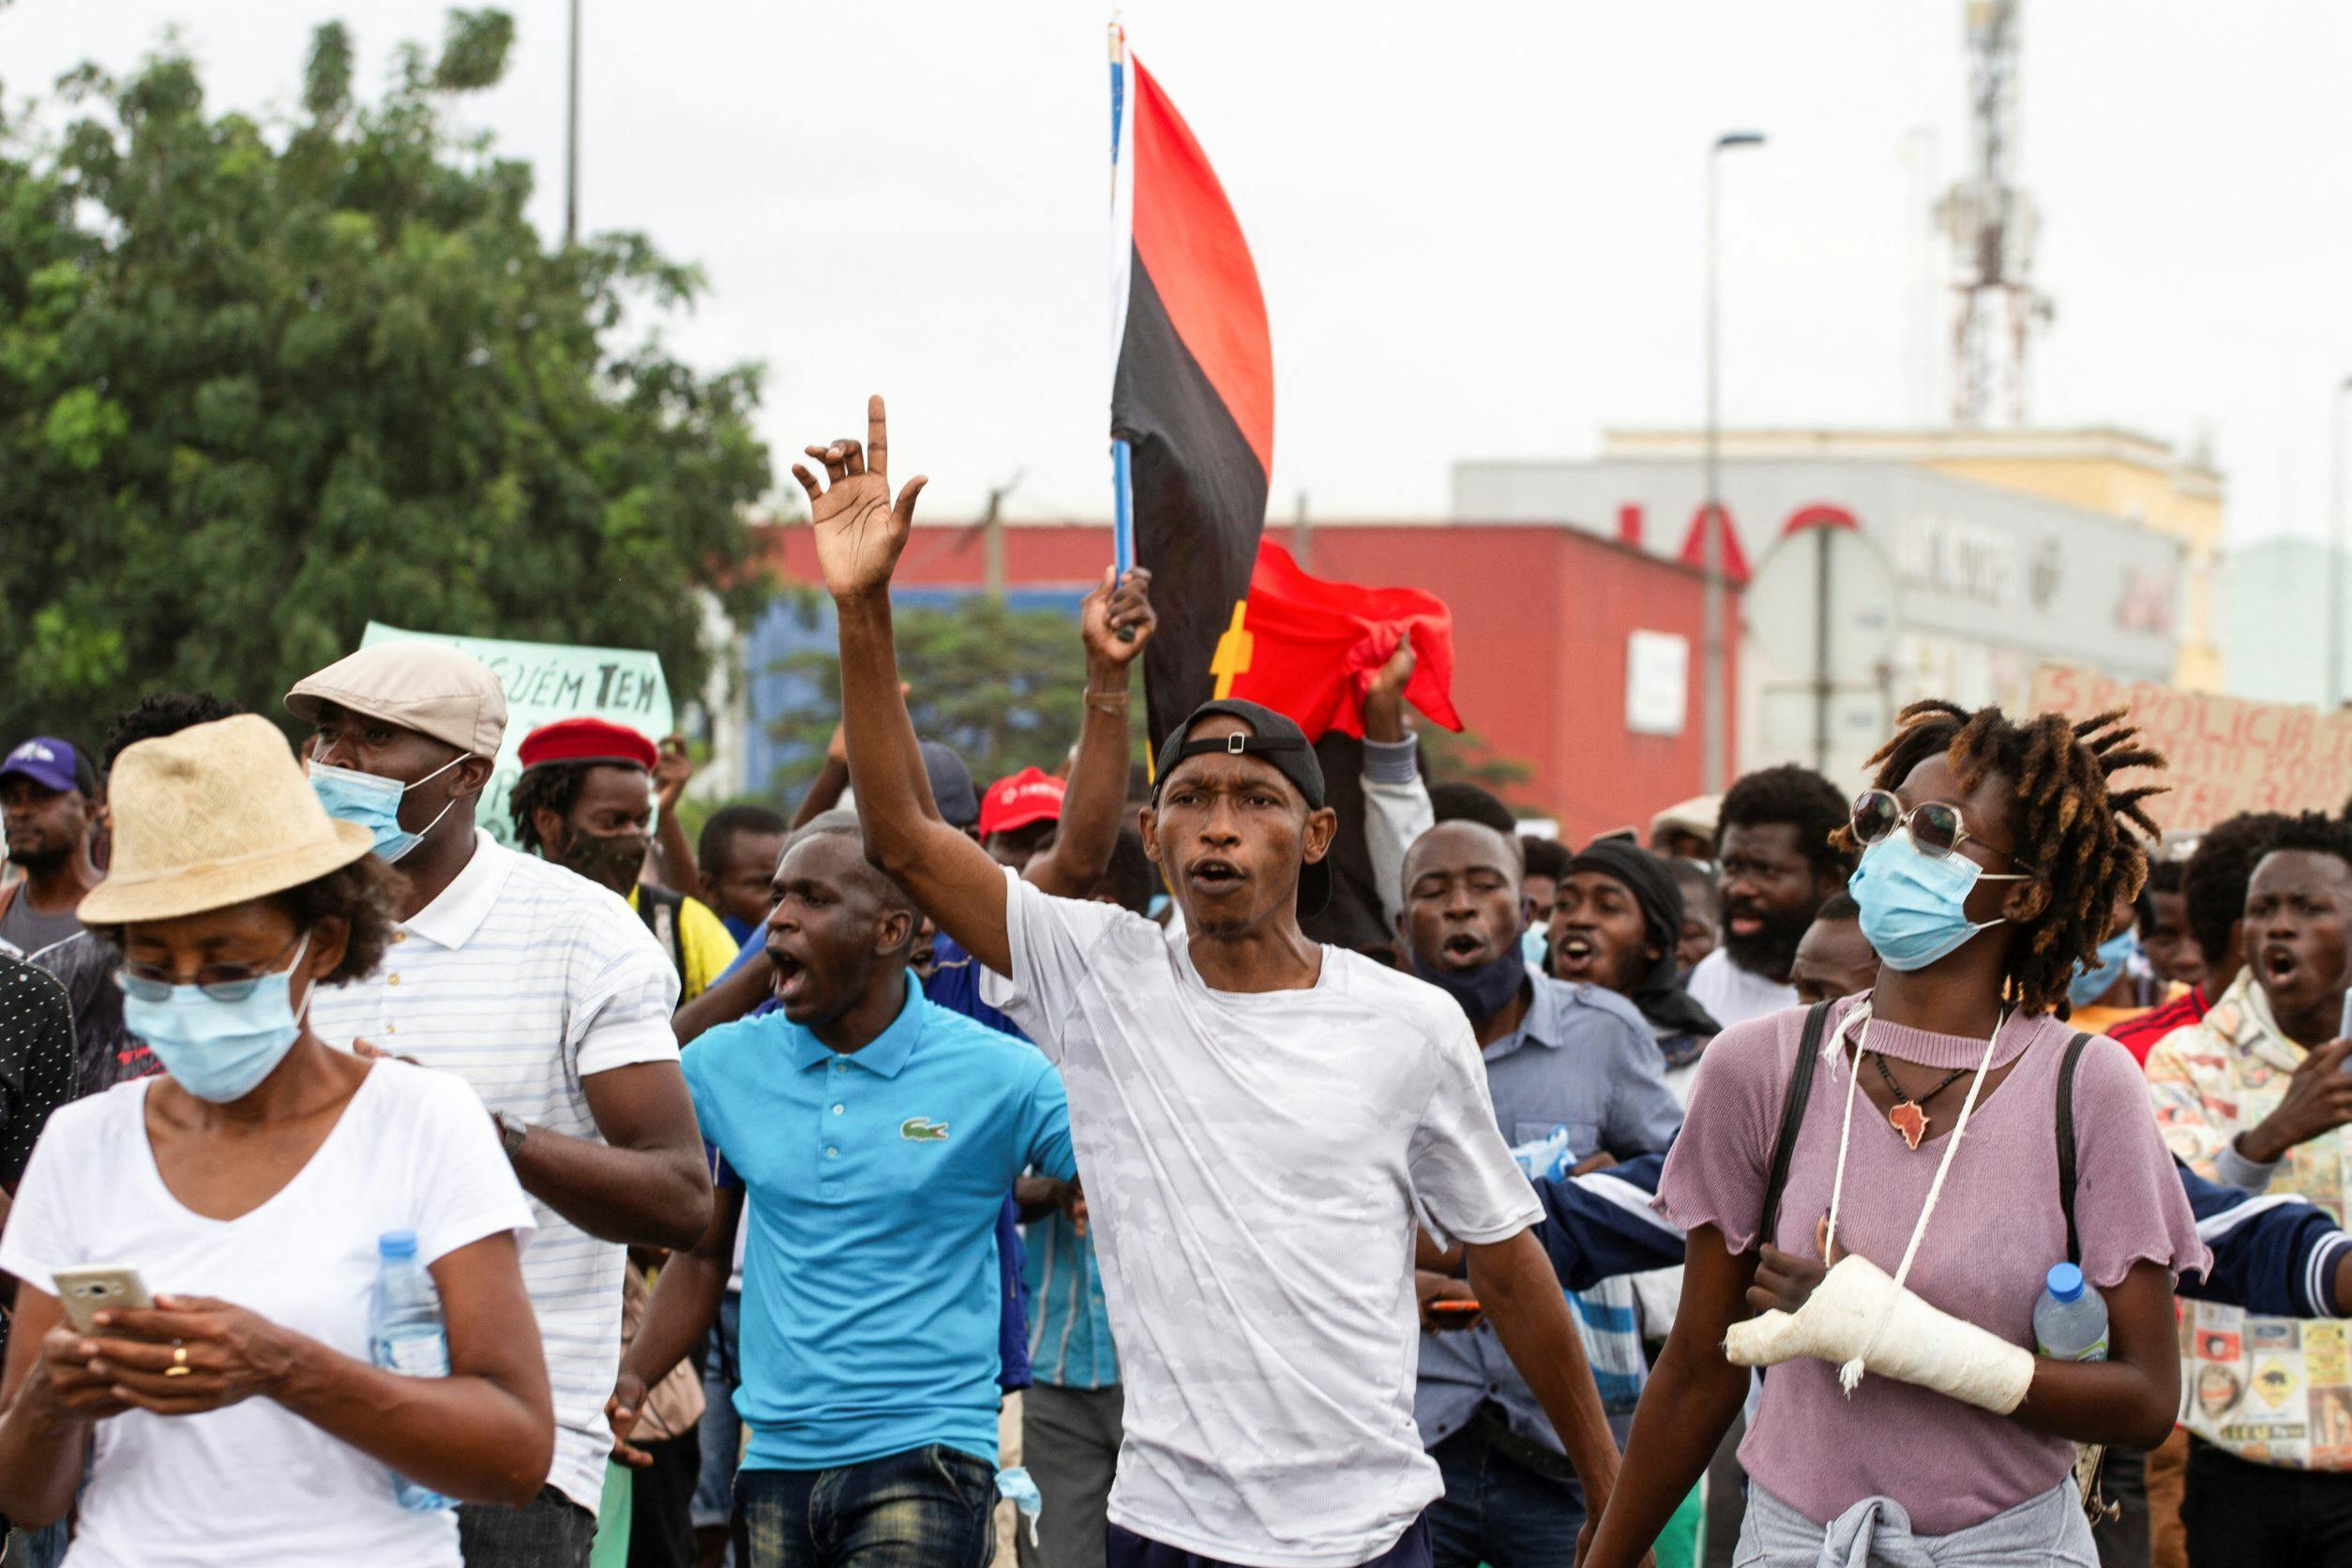 People protest against the increase in the cost of living and corruption in Luanda, Angola